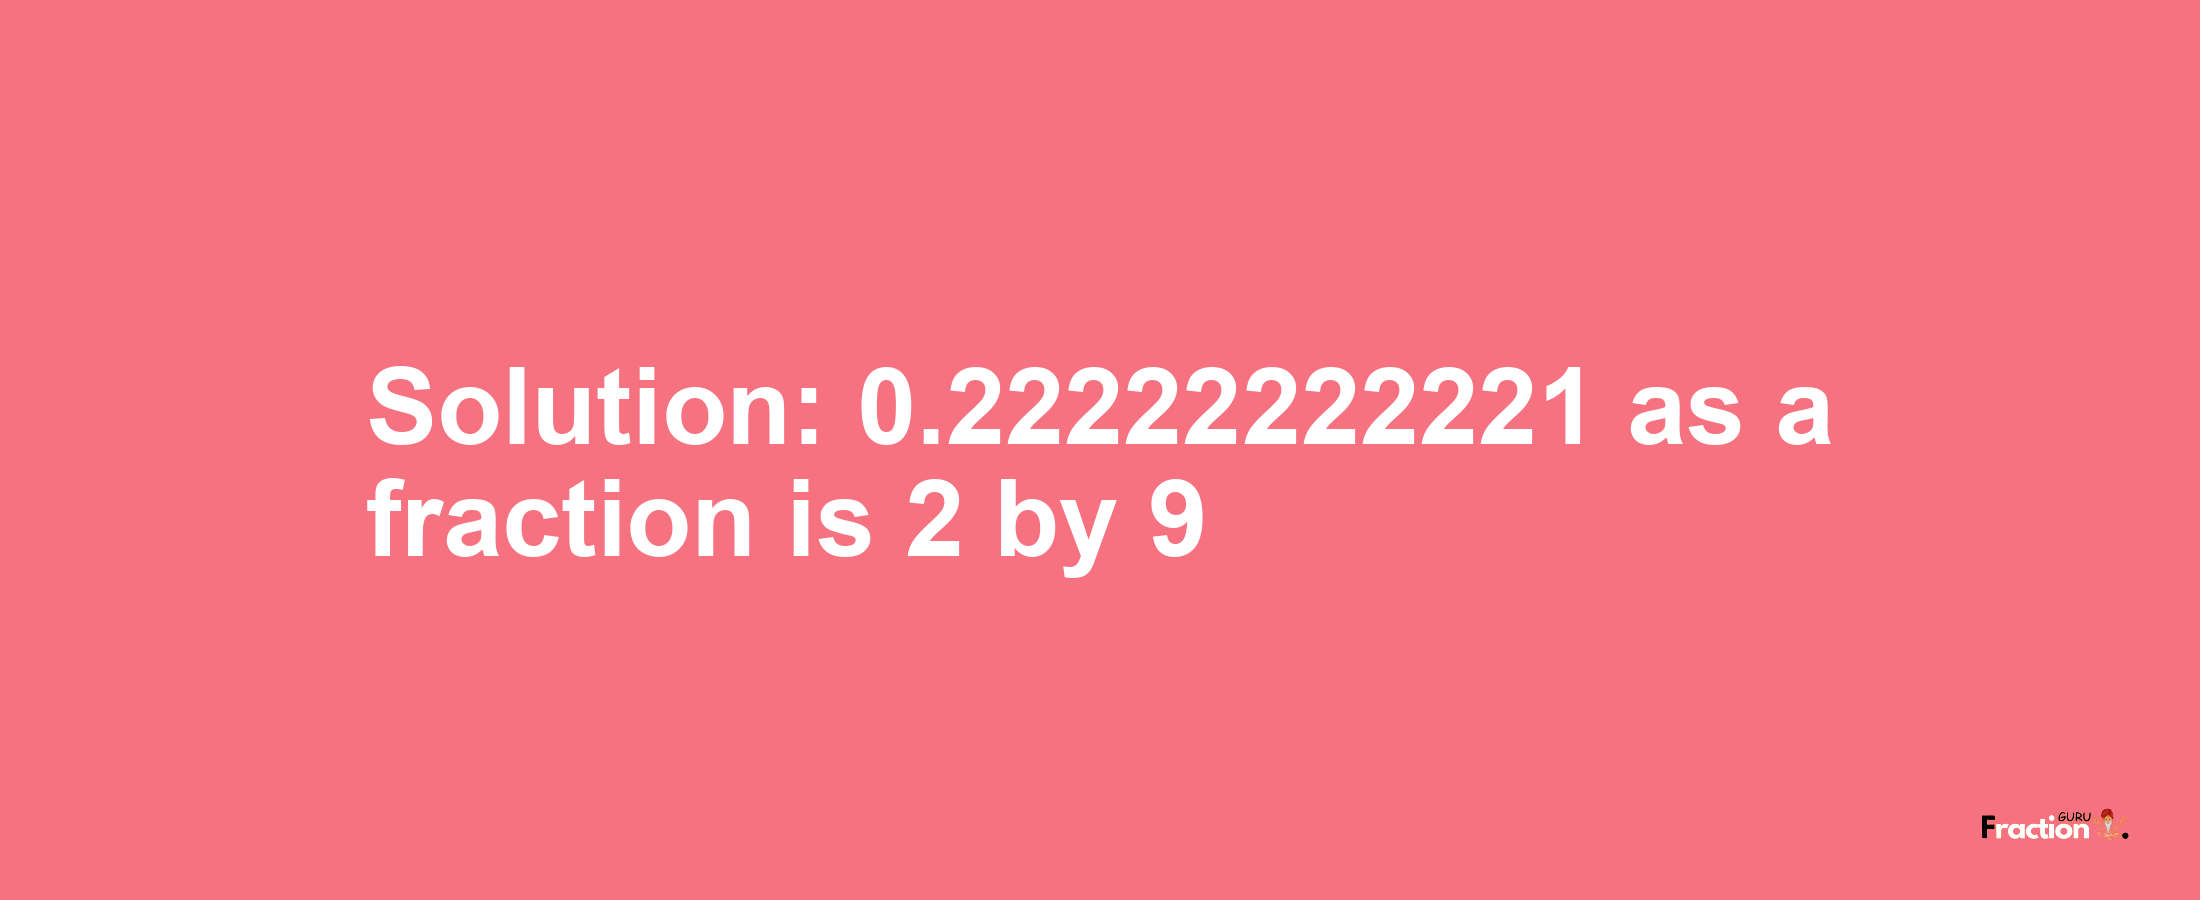 Solution:0.22222222221 as a fraction is 2/9